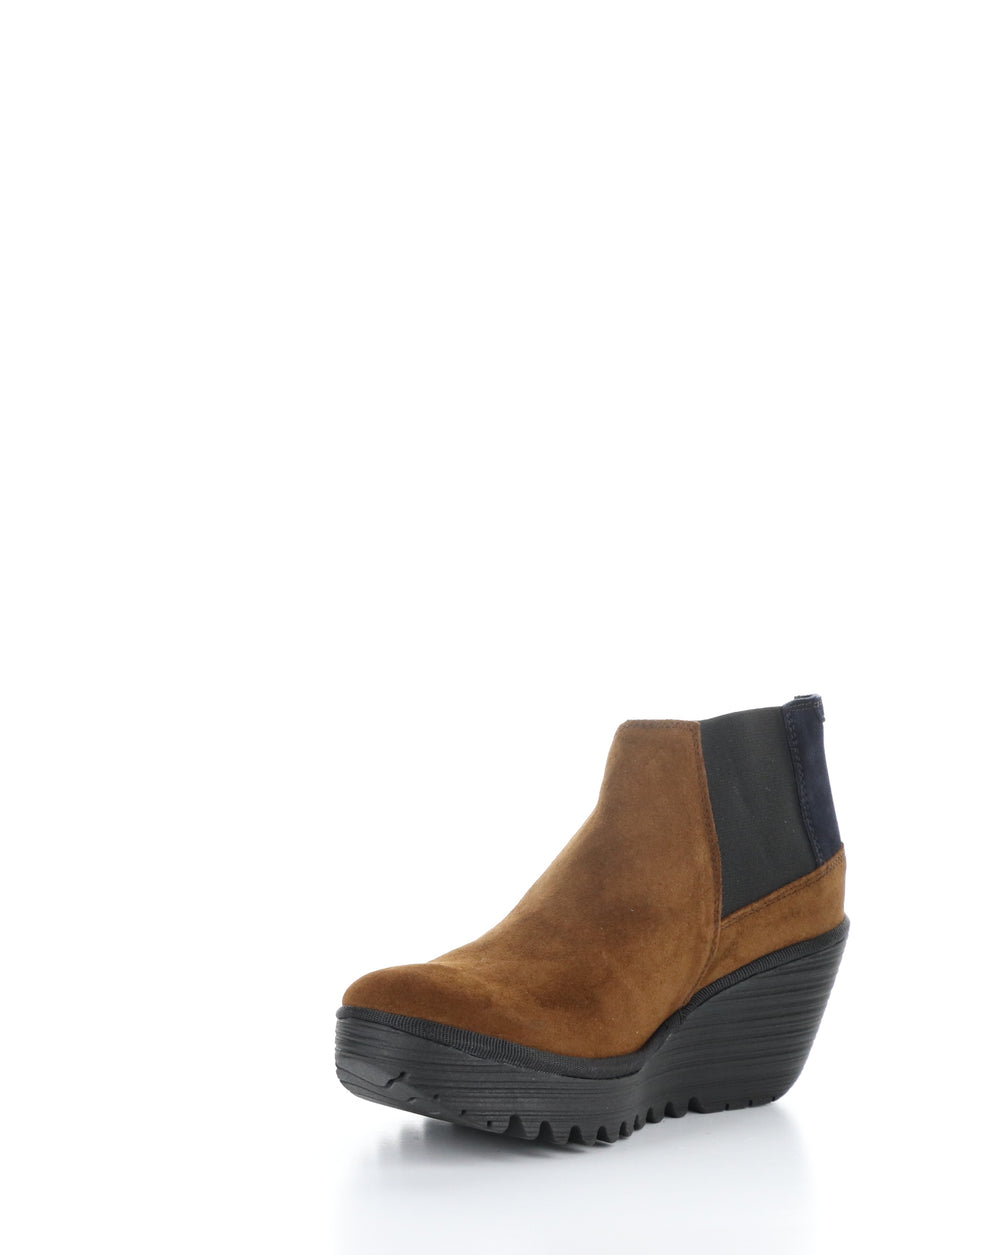 YEGO400FLY 010 CAMEL/NAVY Elasticated Boots